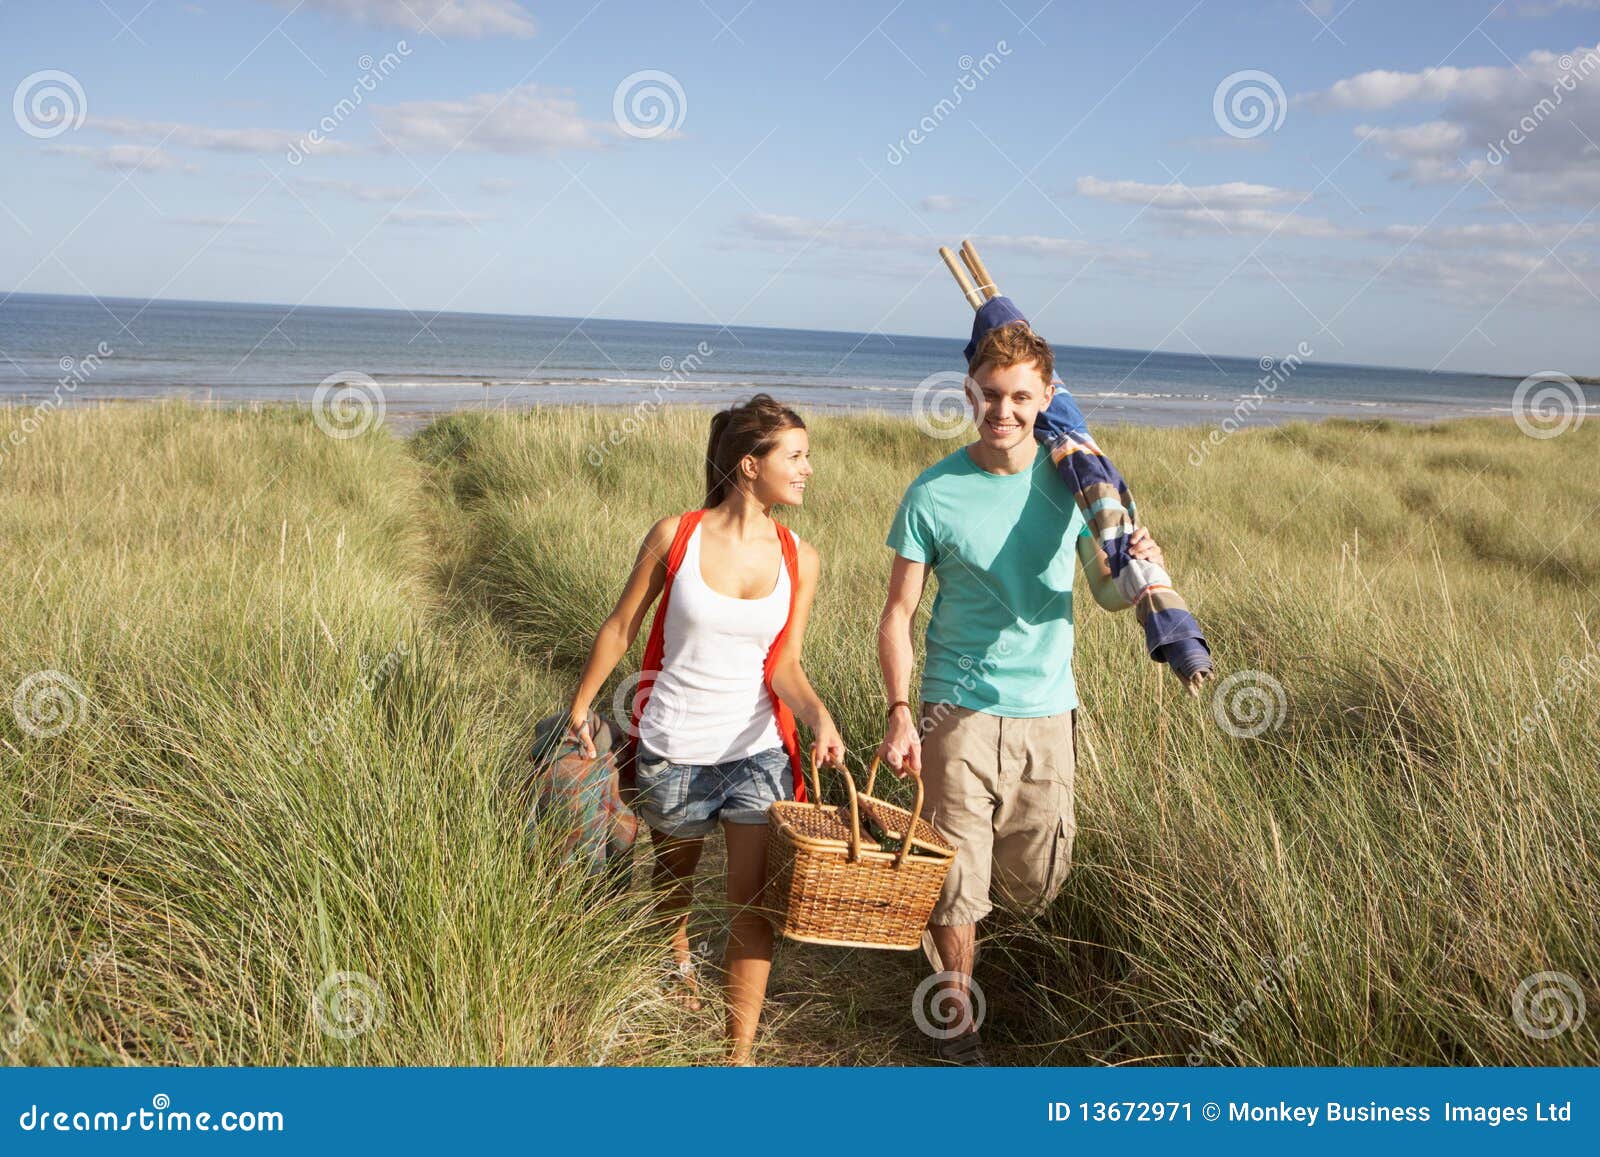 young couple carrying picnic basket and windbreak